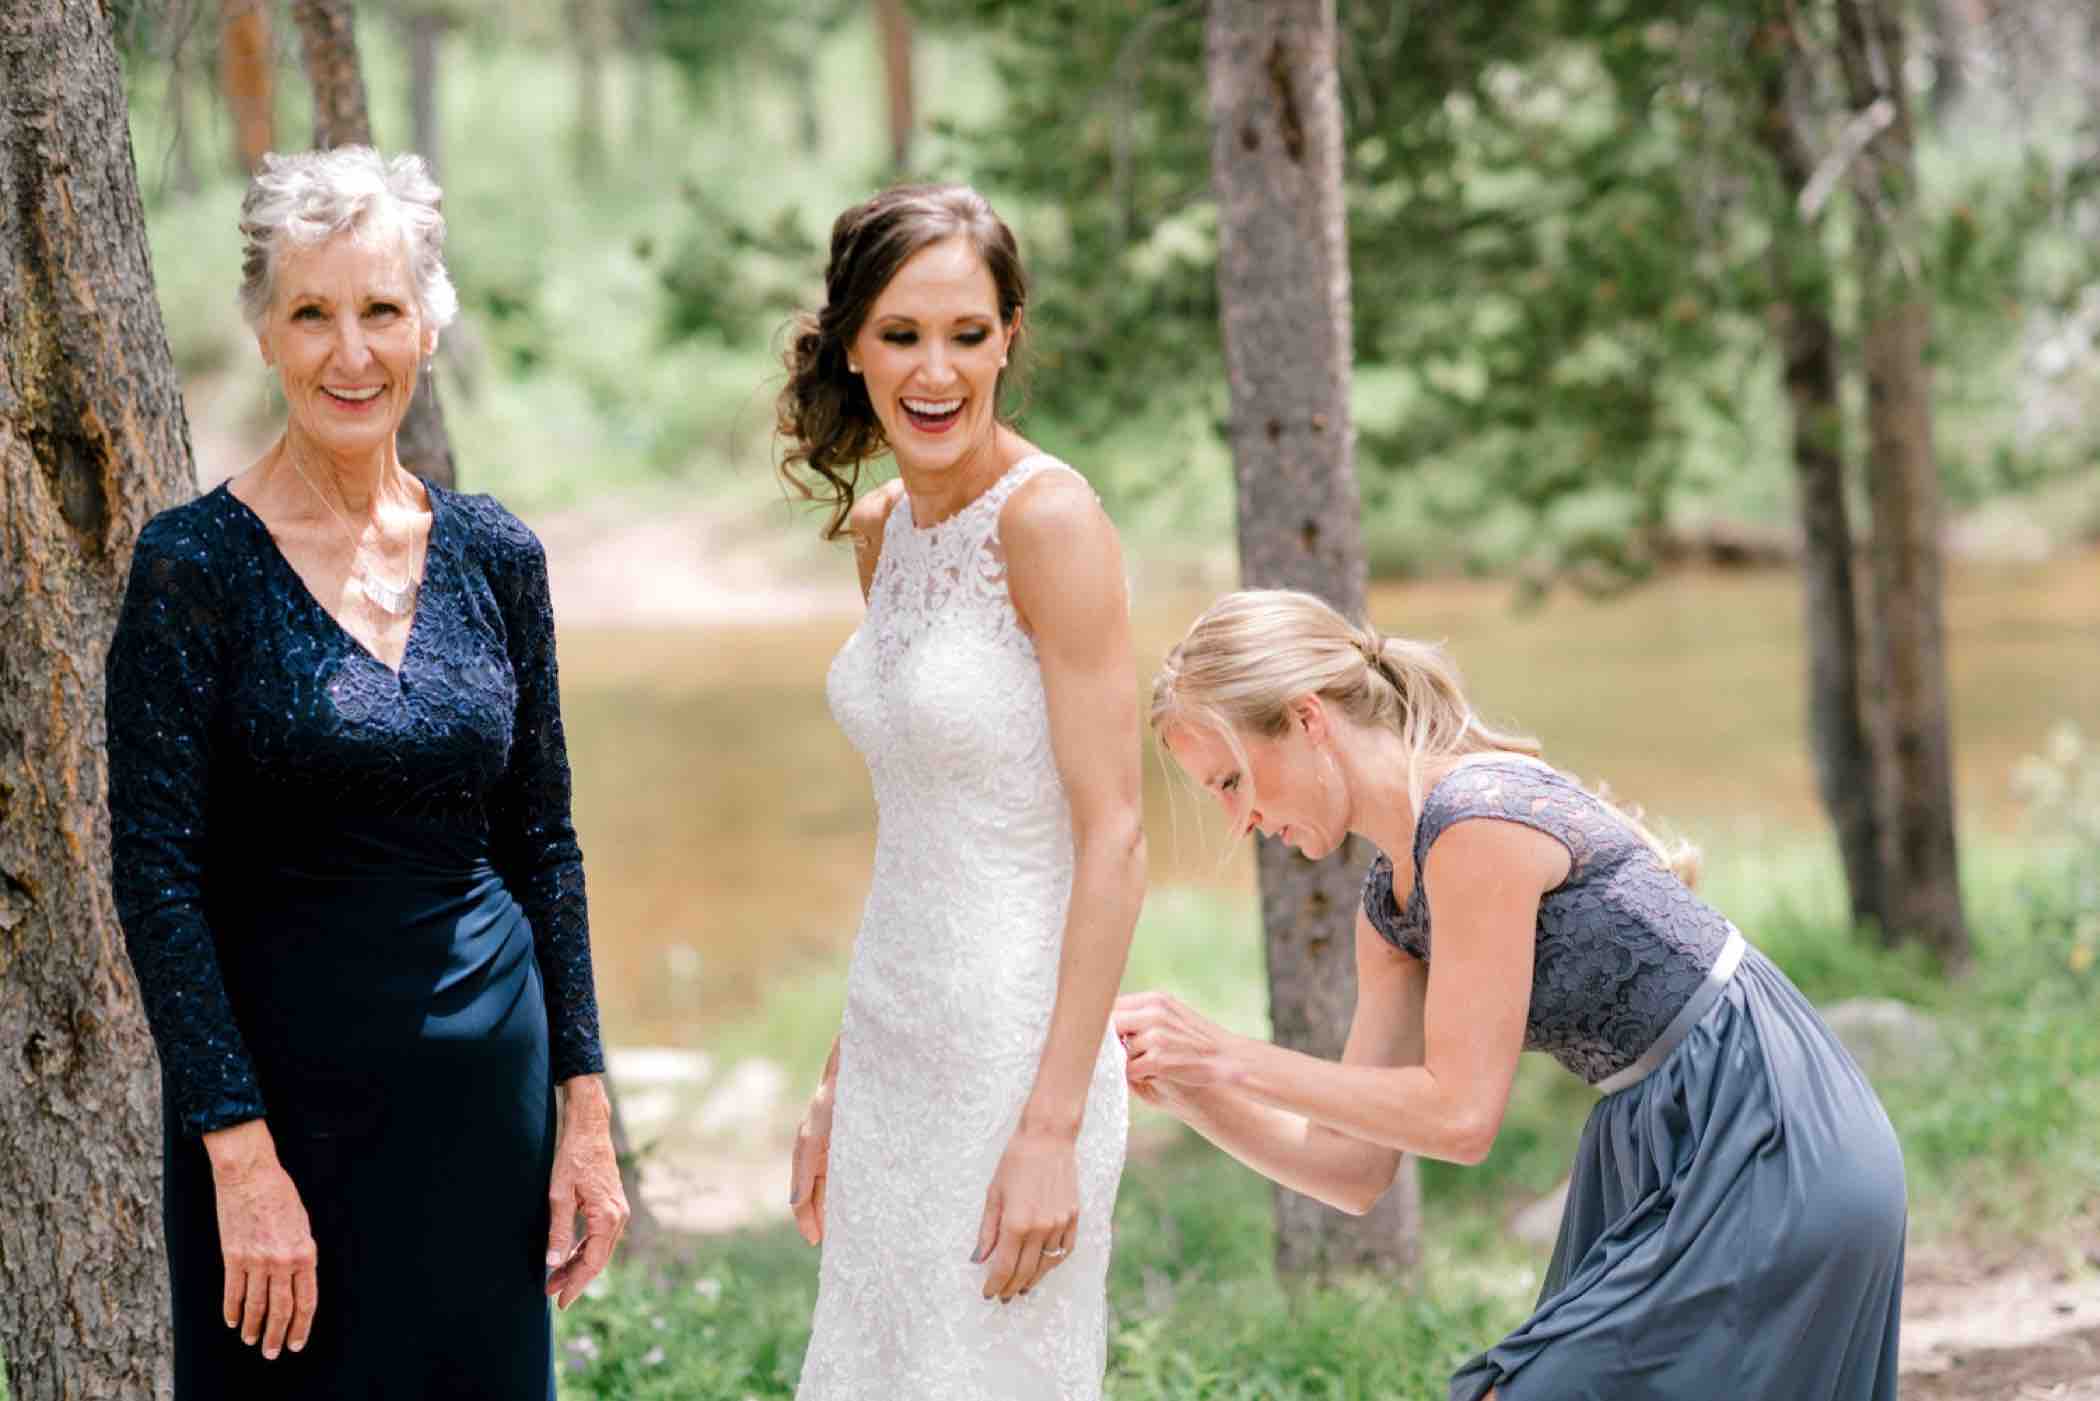 Sallie putting her wedding dress outside at Piney River Ranch in Vail, Colorado. Photo by Ali and Garrett, Romantic, Adventurous, Nostalgic Wedding Photographers.